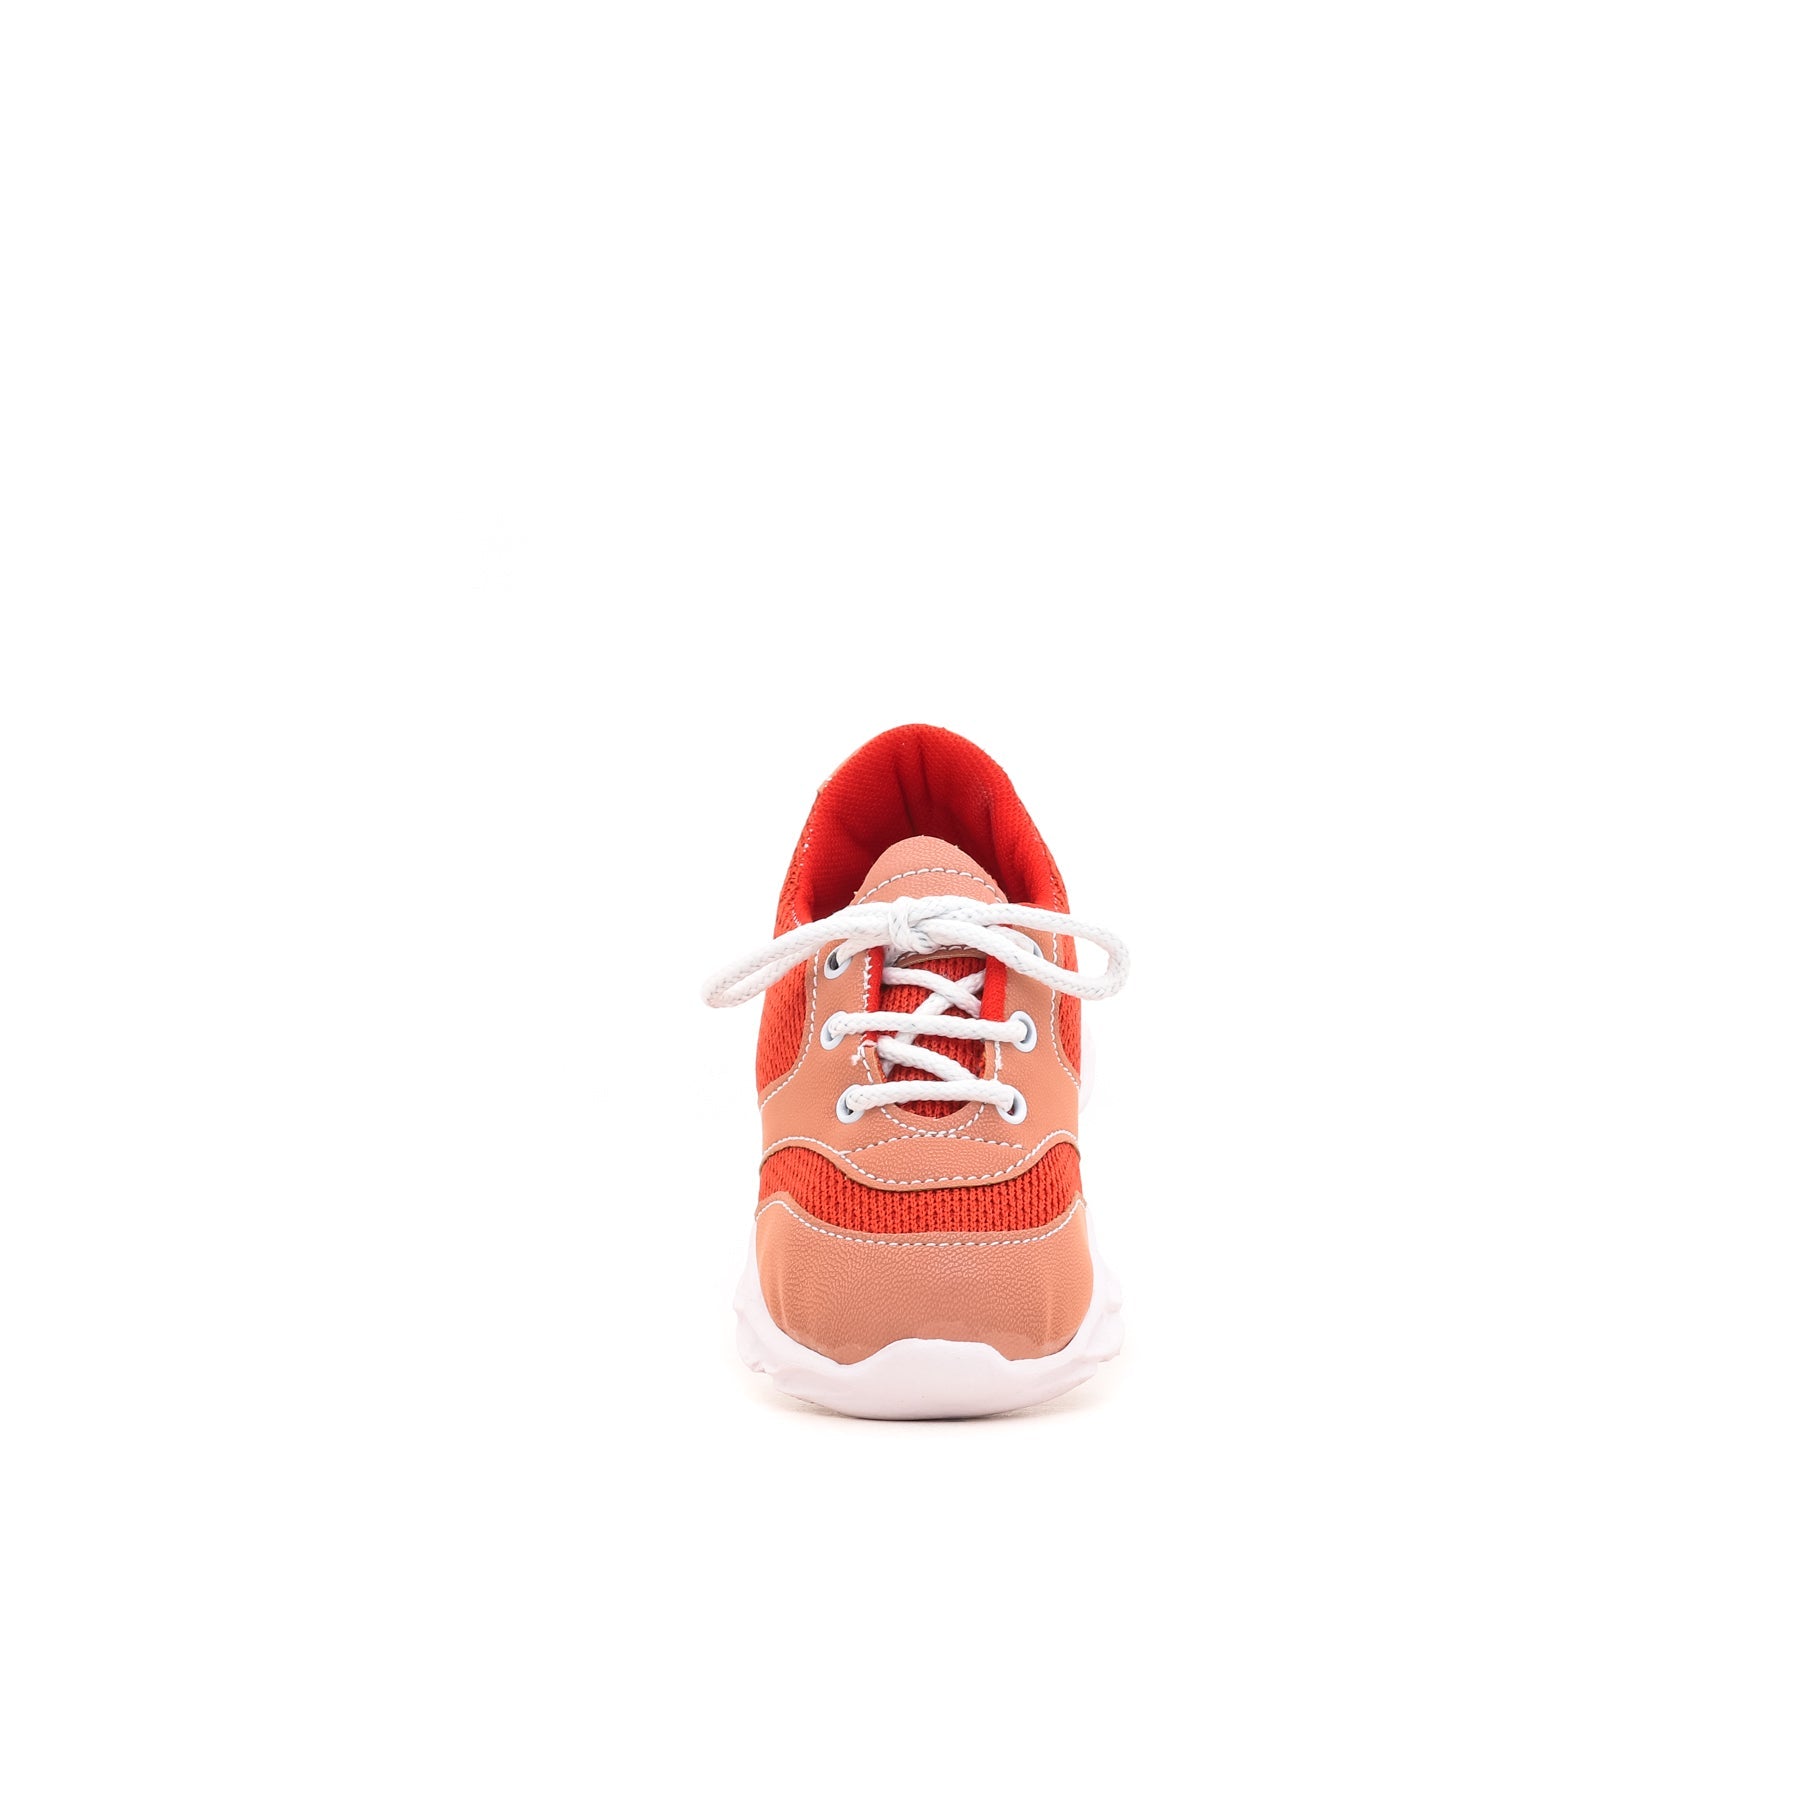 Babies Red Casual Booties KD7359